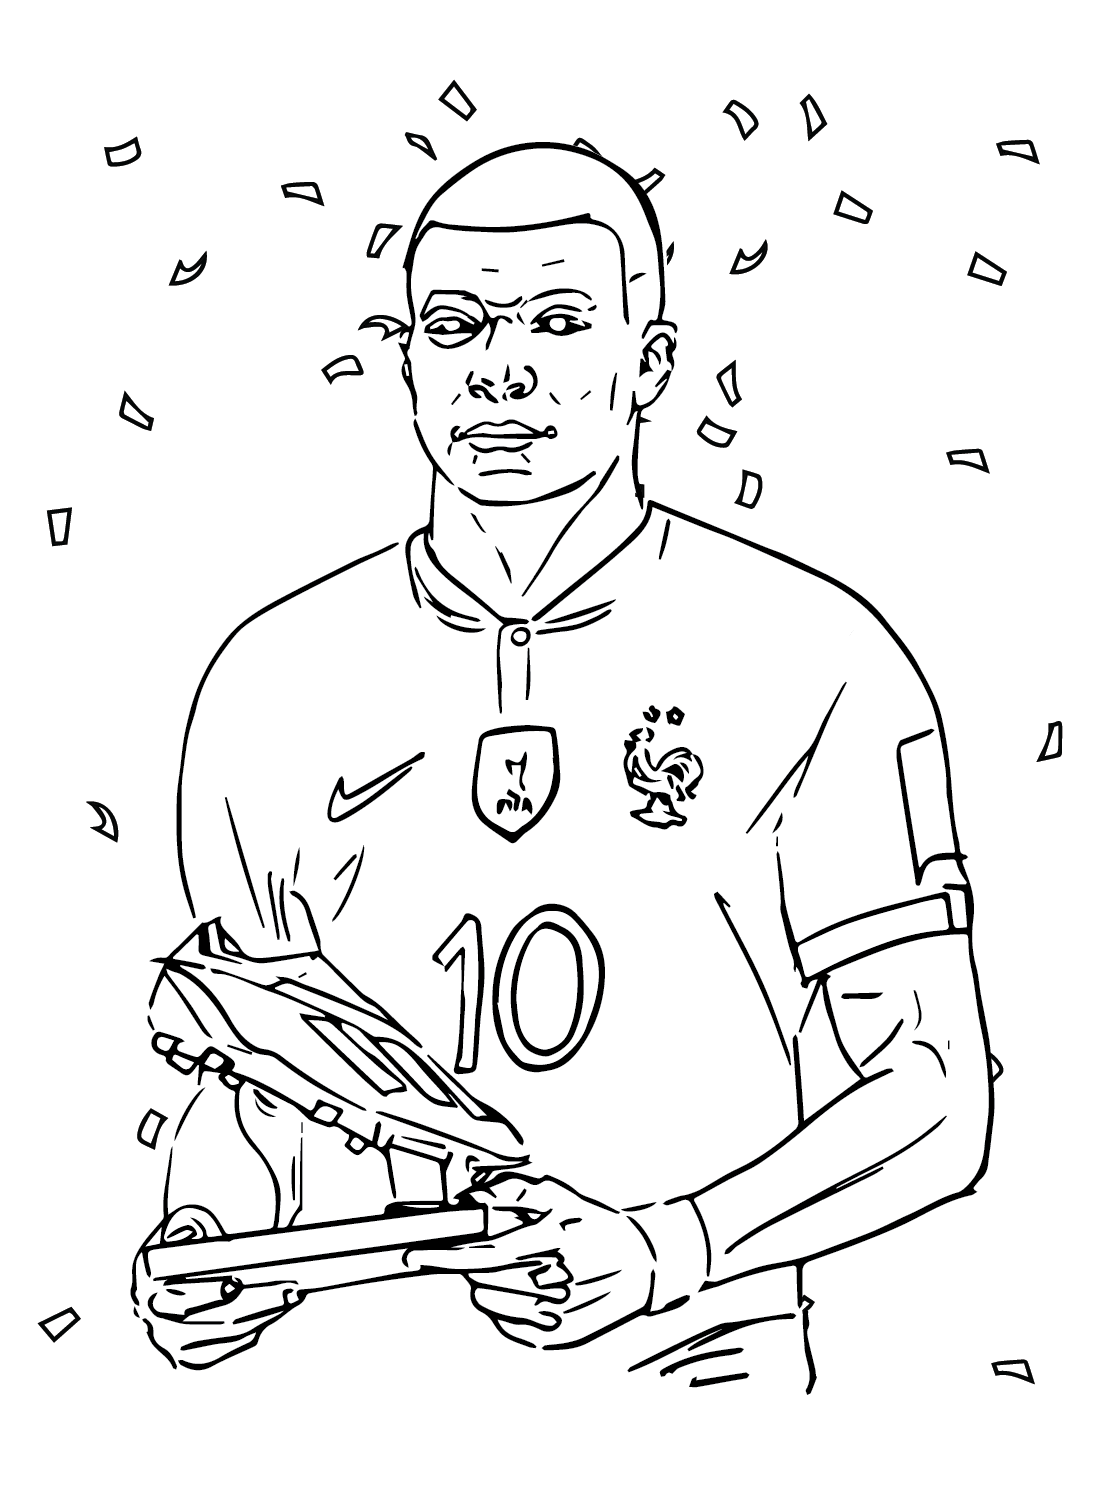 Kylian Mbappé for Kids Coloring Pages - Kylian Mbappé Coloring Pages - Coloring  Pages For Kids And Adults